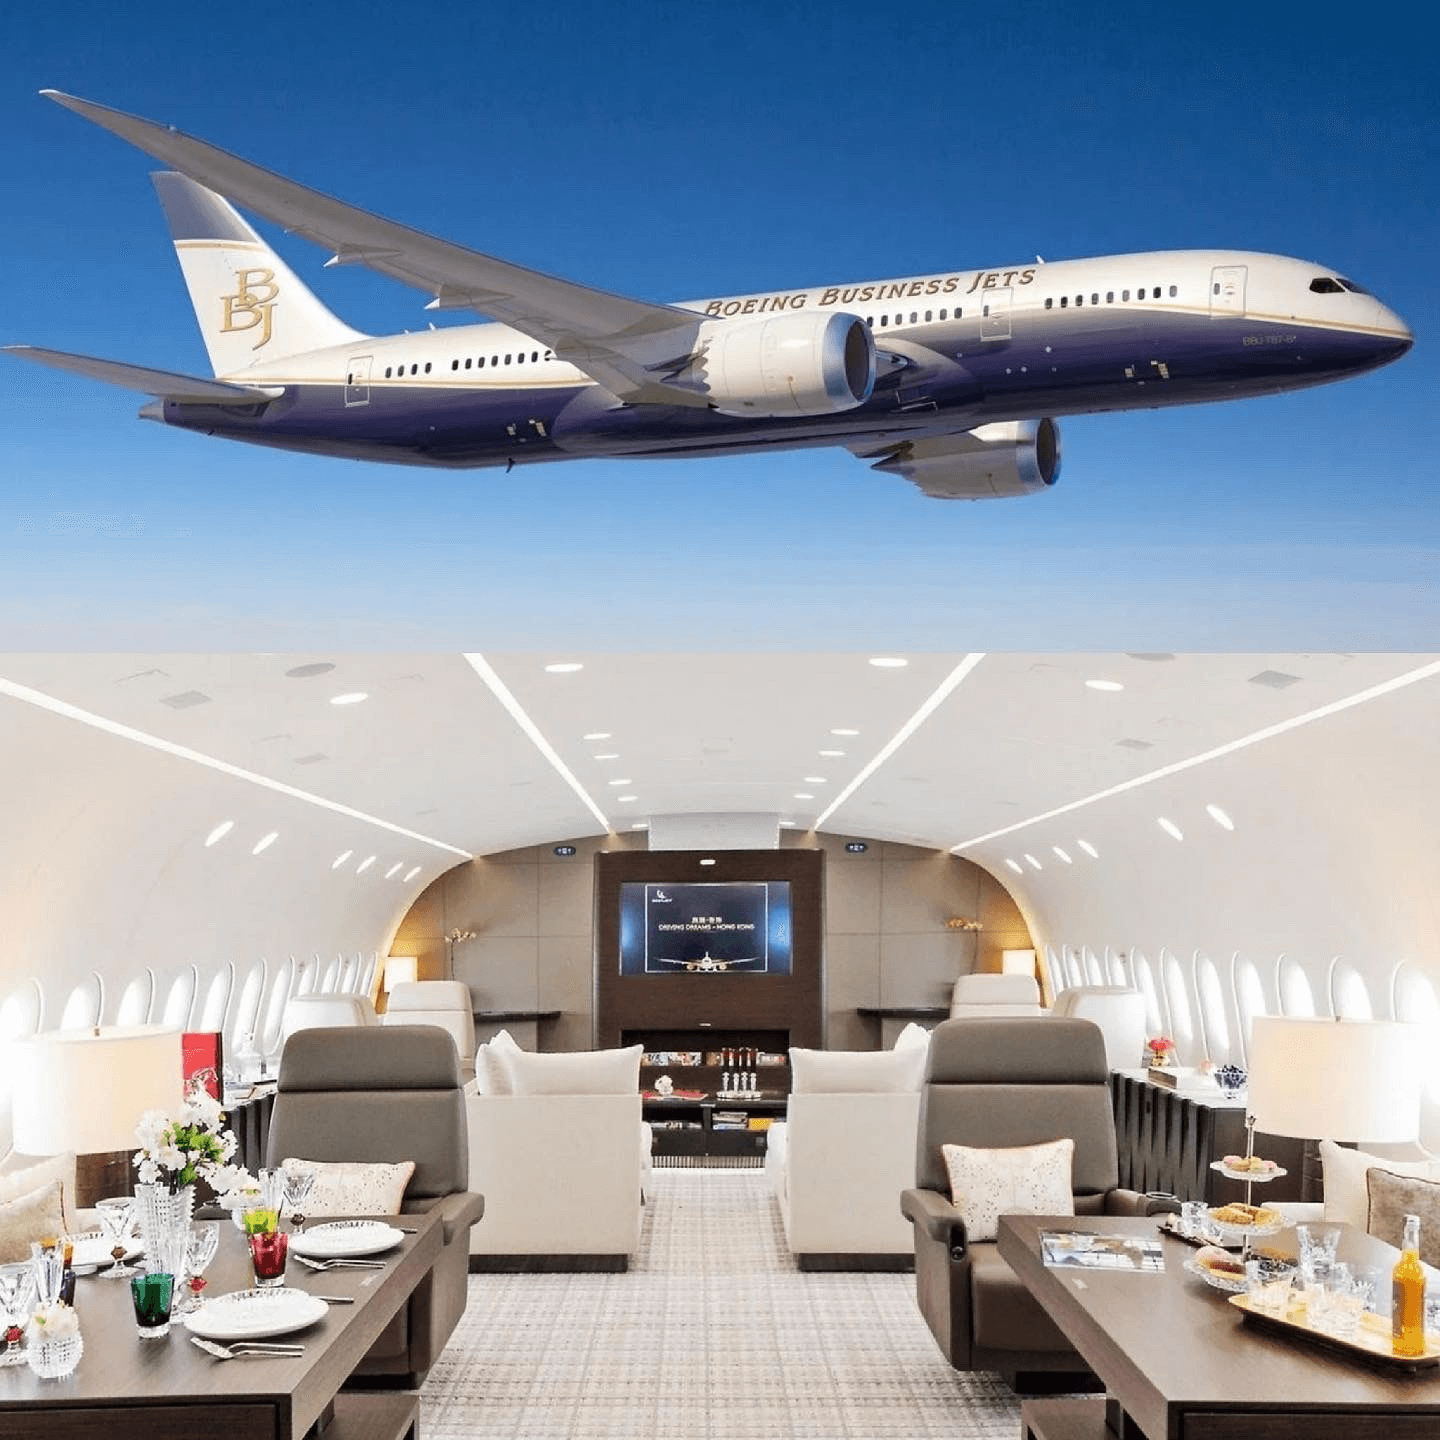 Inside the Boeing 787 Dreamliner private jet, price, range and seating capacity